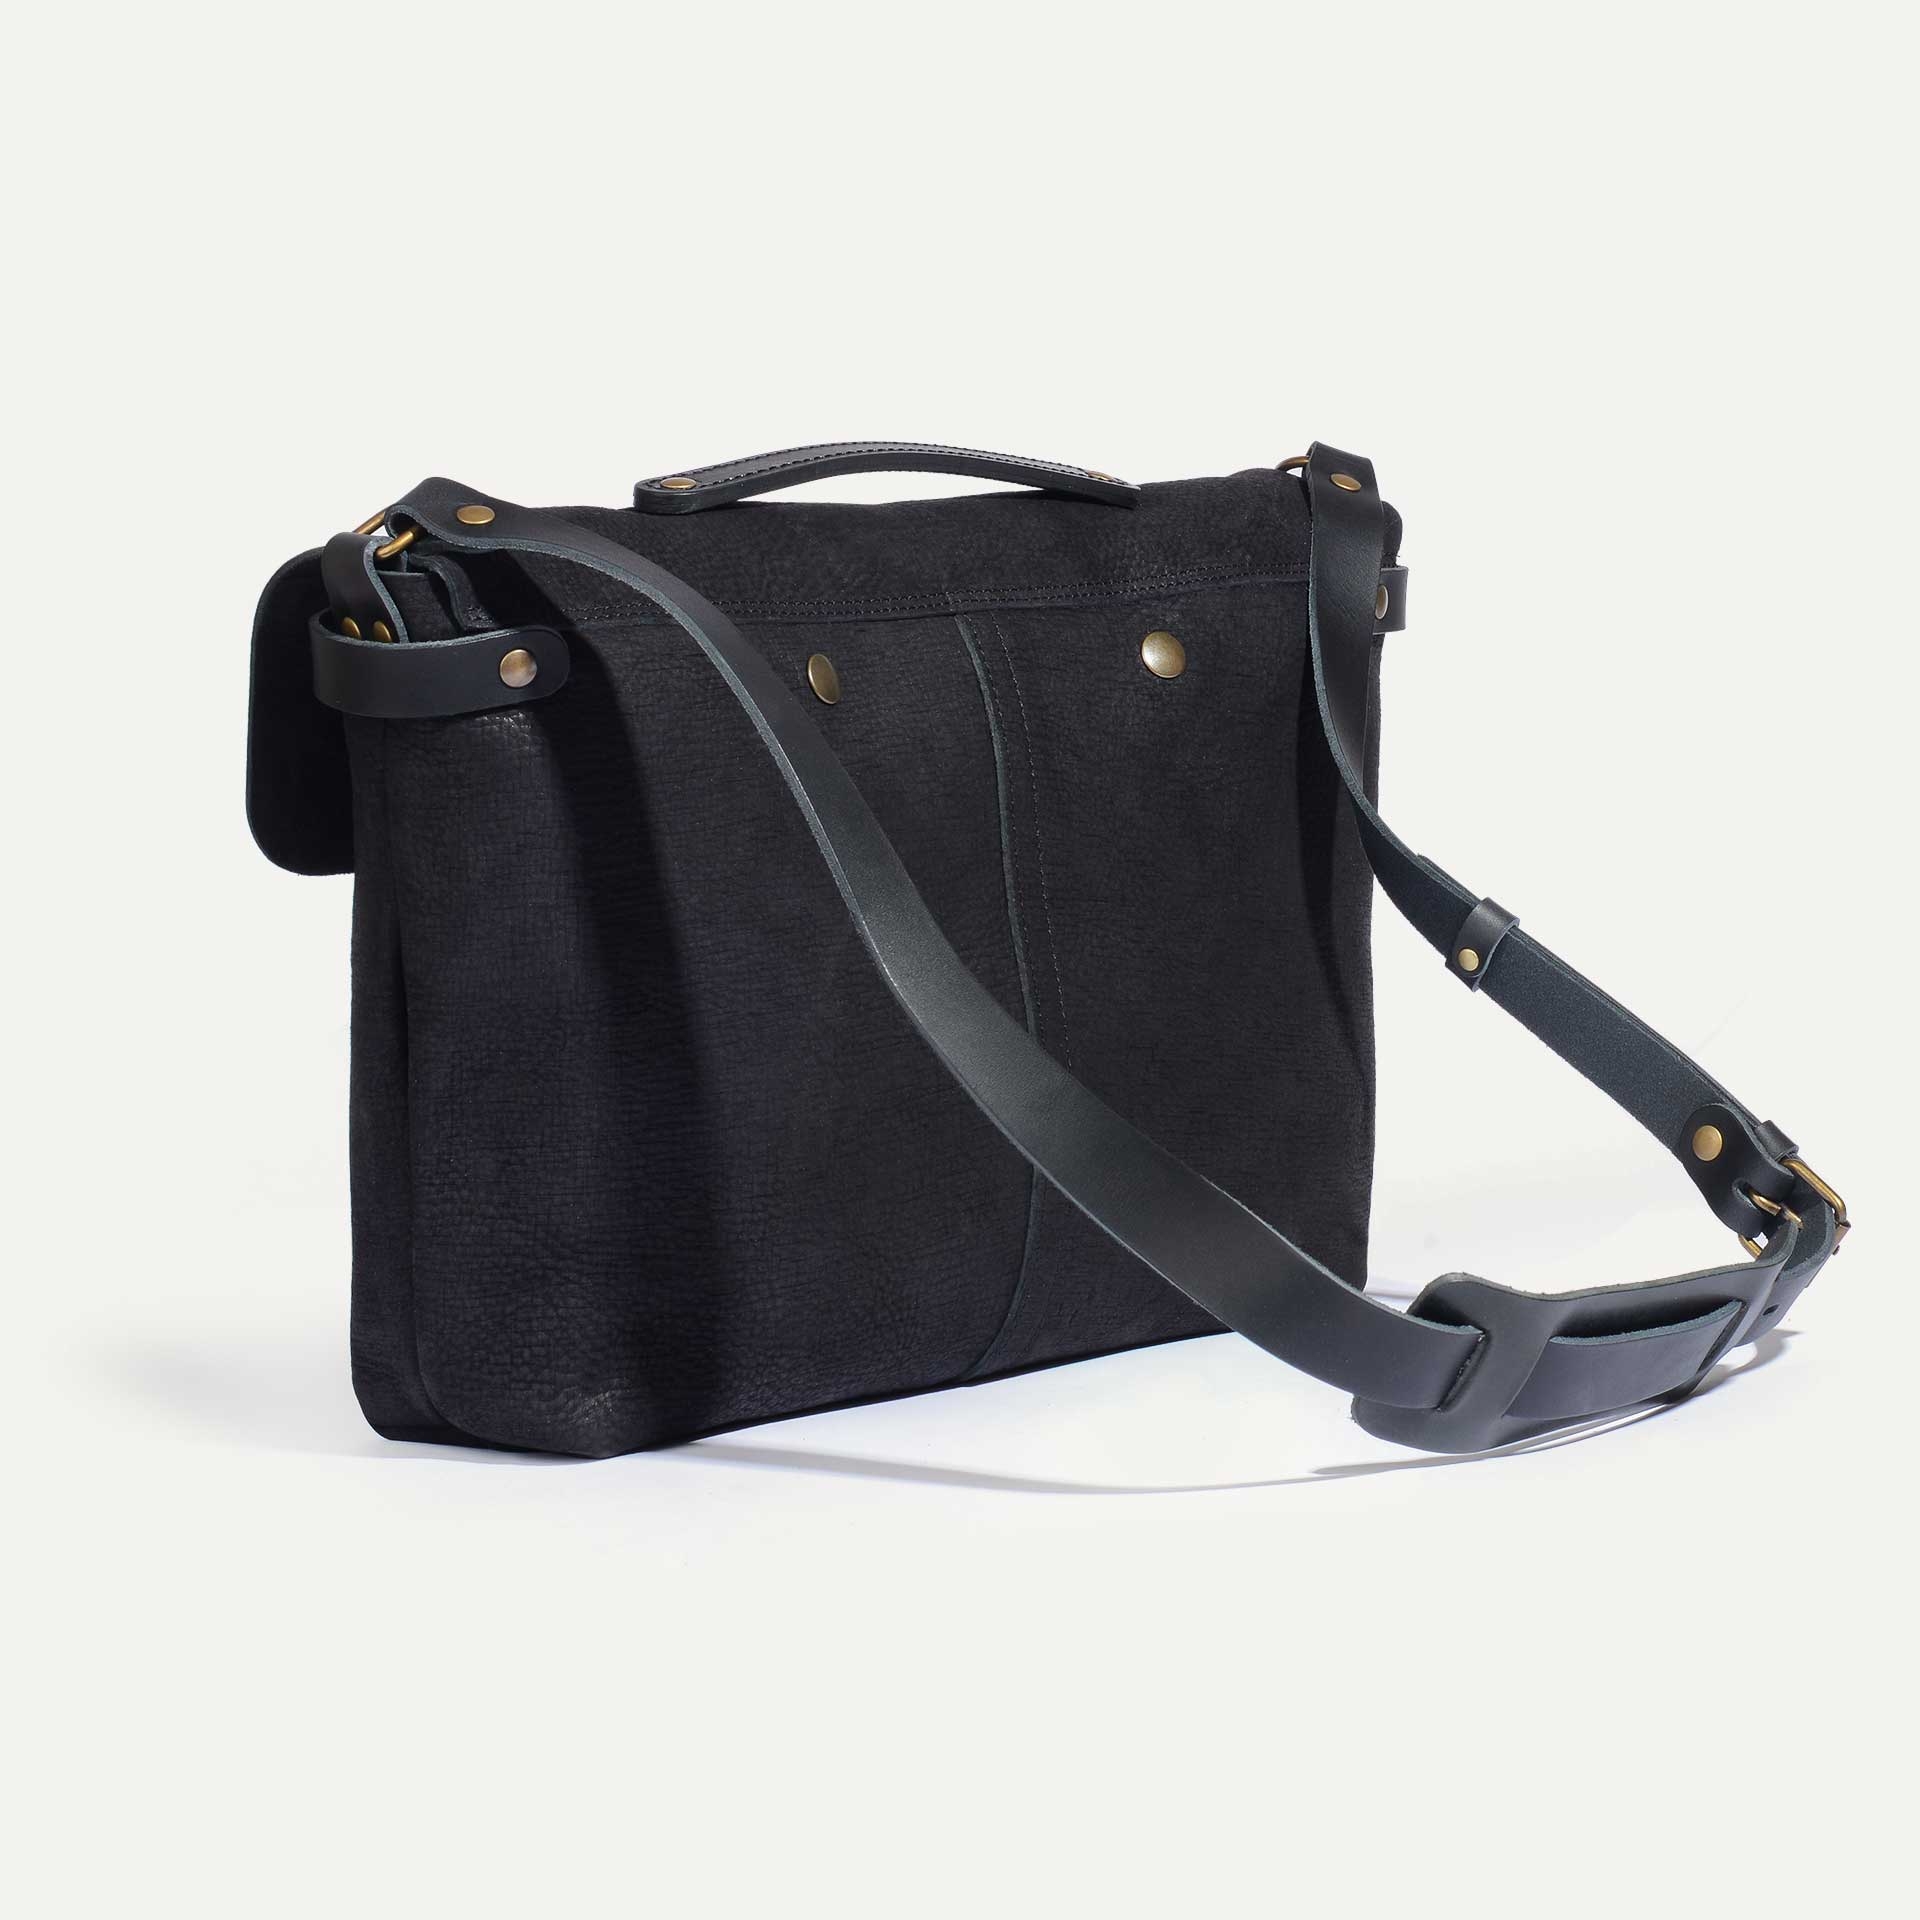 Lucien Satchel bag - Charcoal Black / Waxed Leather (image n°3)